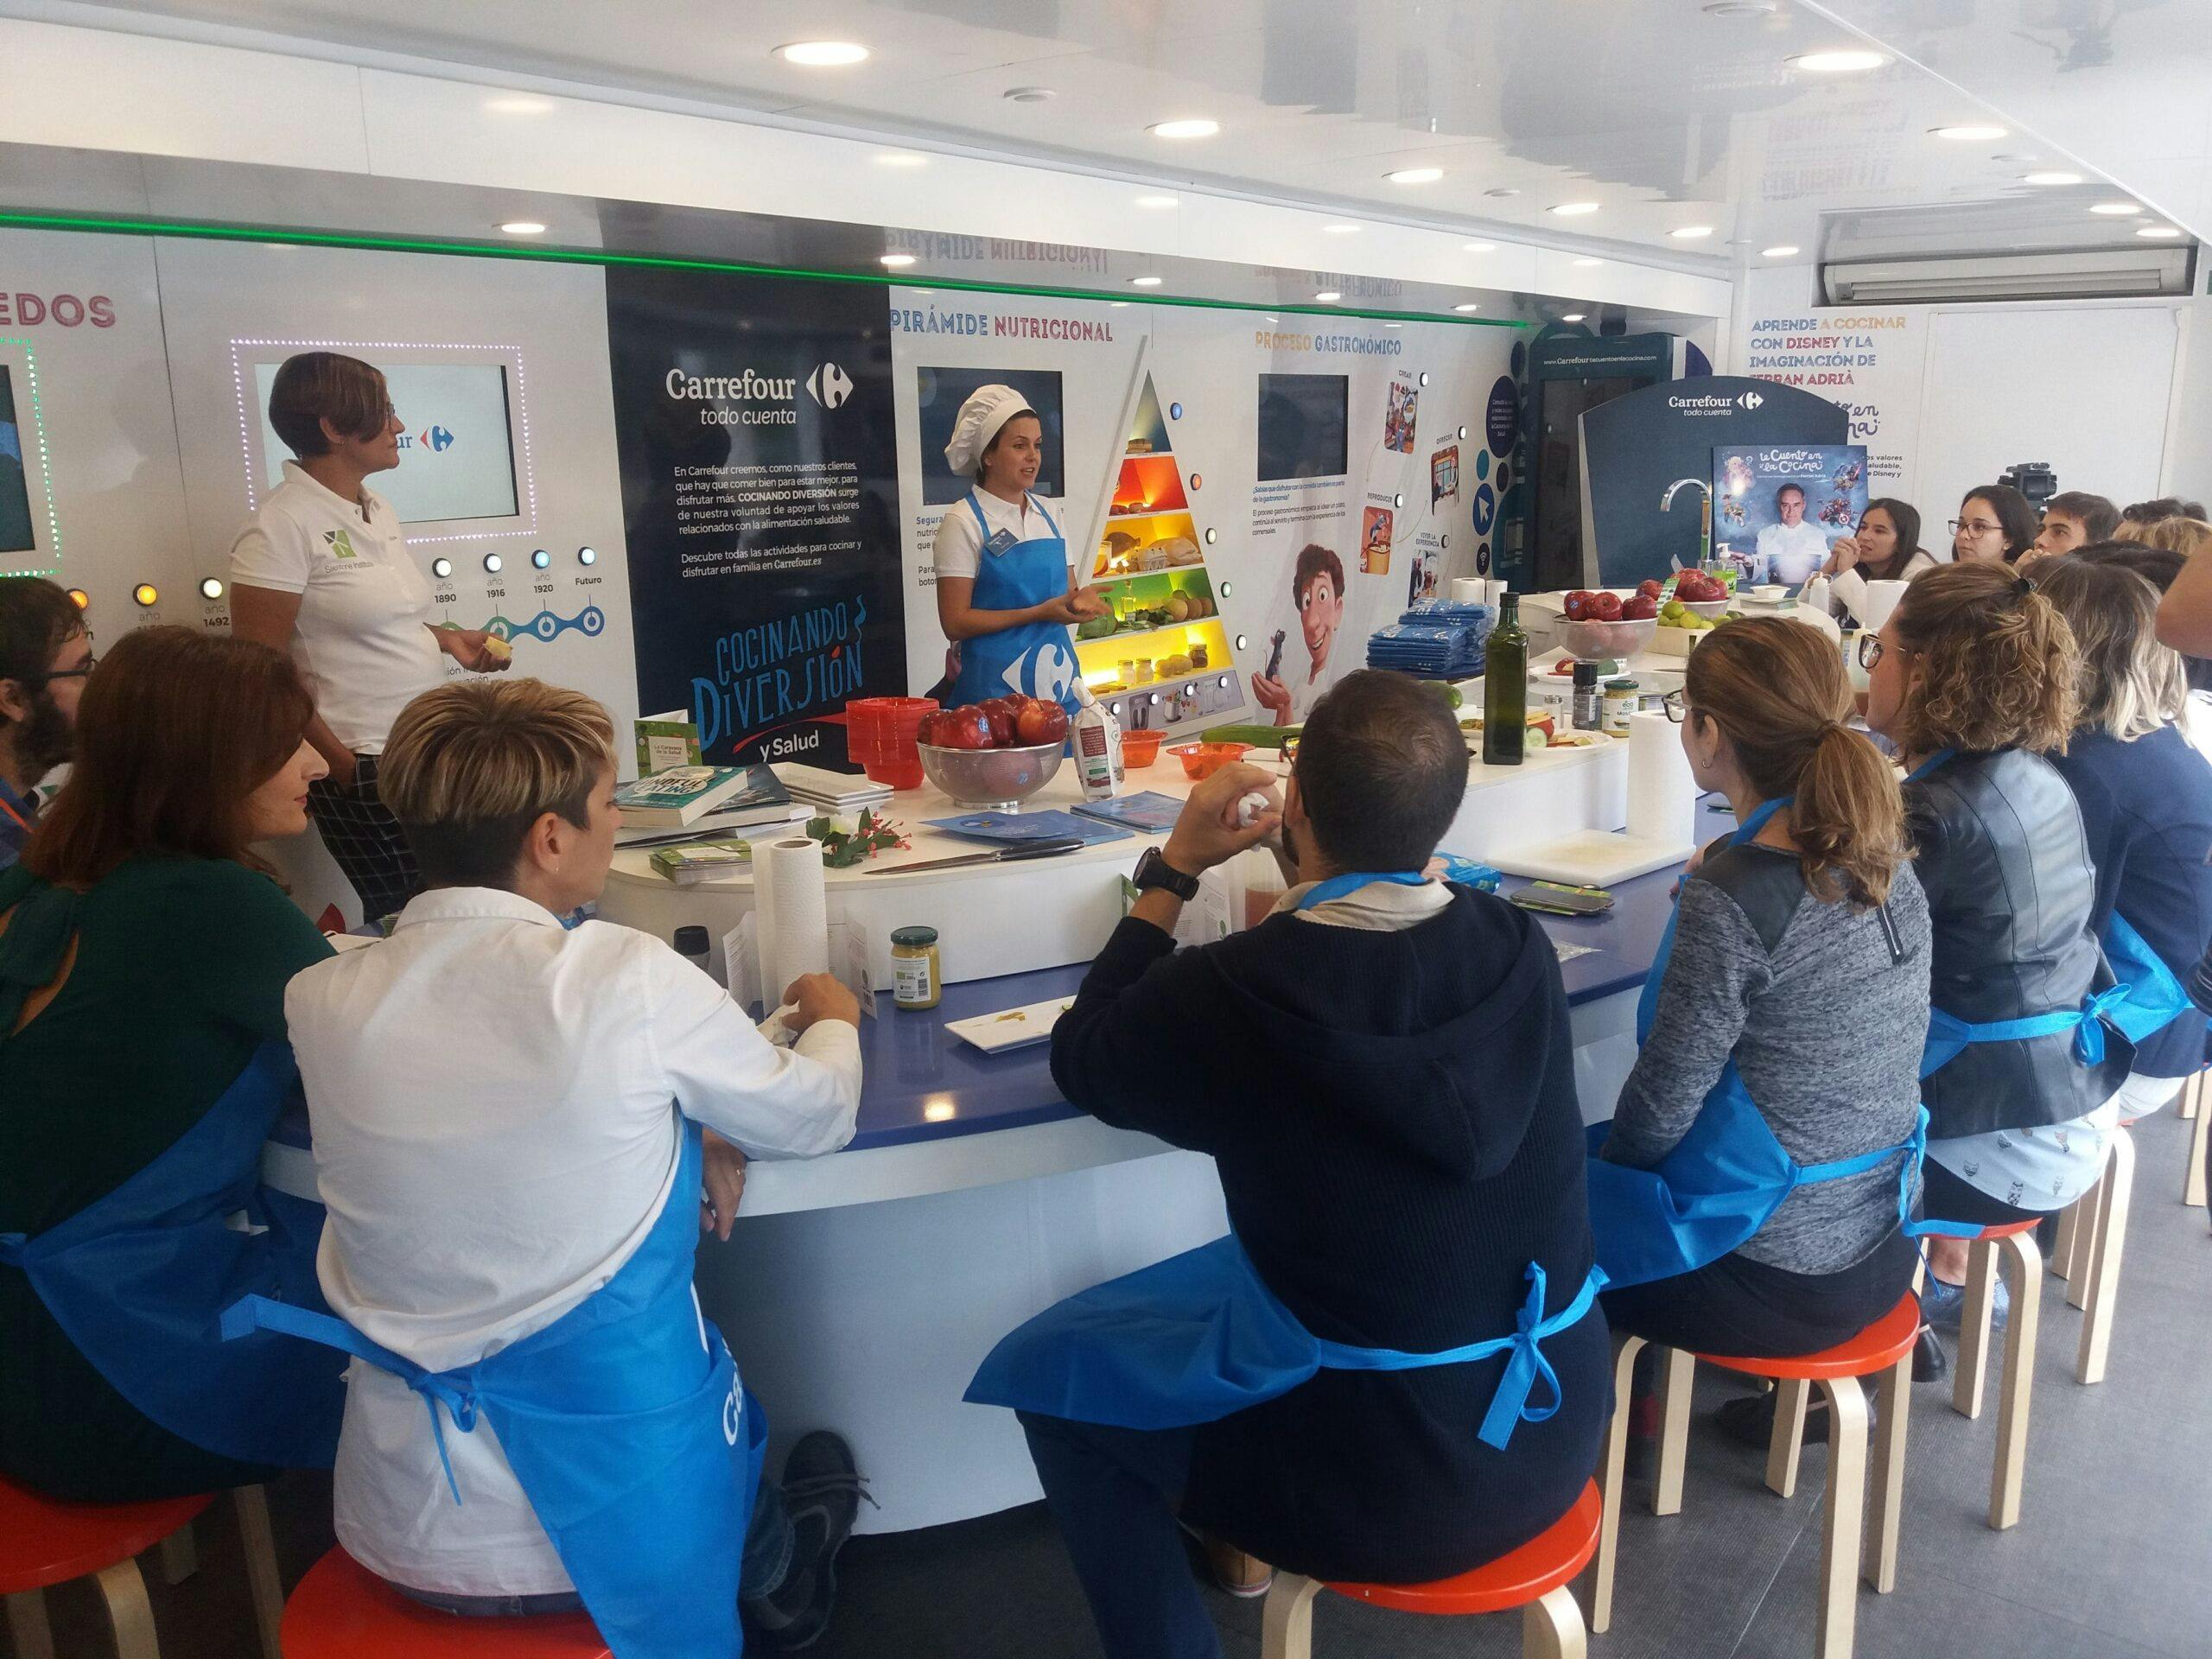 Image 34 of InstitutoSilestone CaravanadelaSalud en Cosentino 5 1 1 scaled in Cosentino promotes good nutrition and food safety - Cosentino